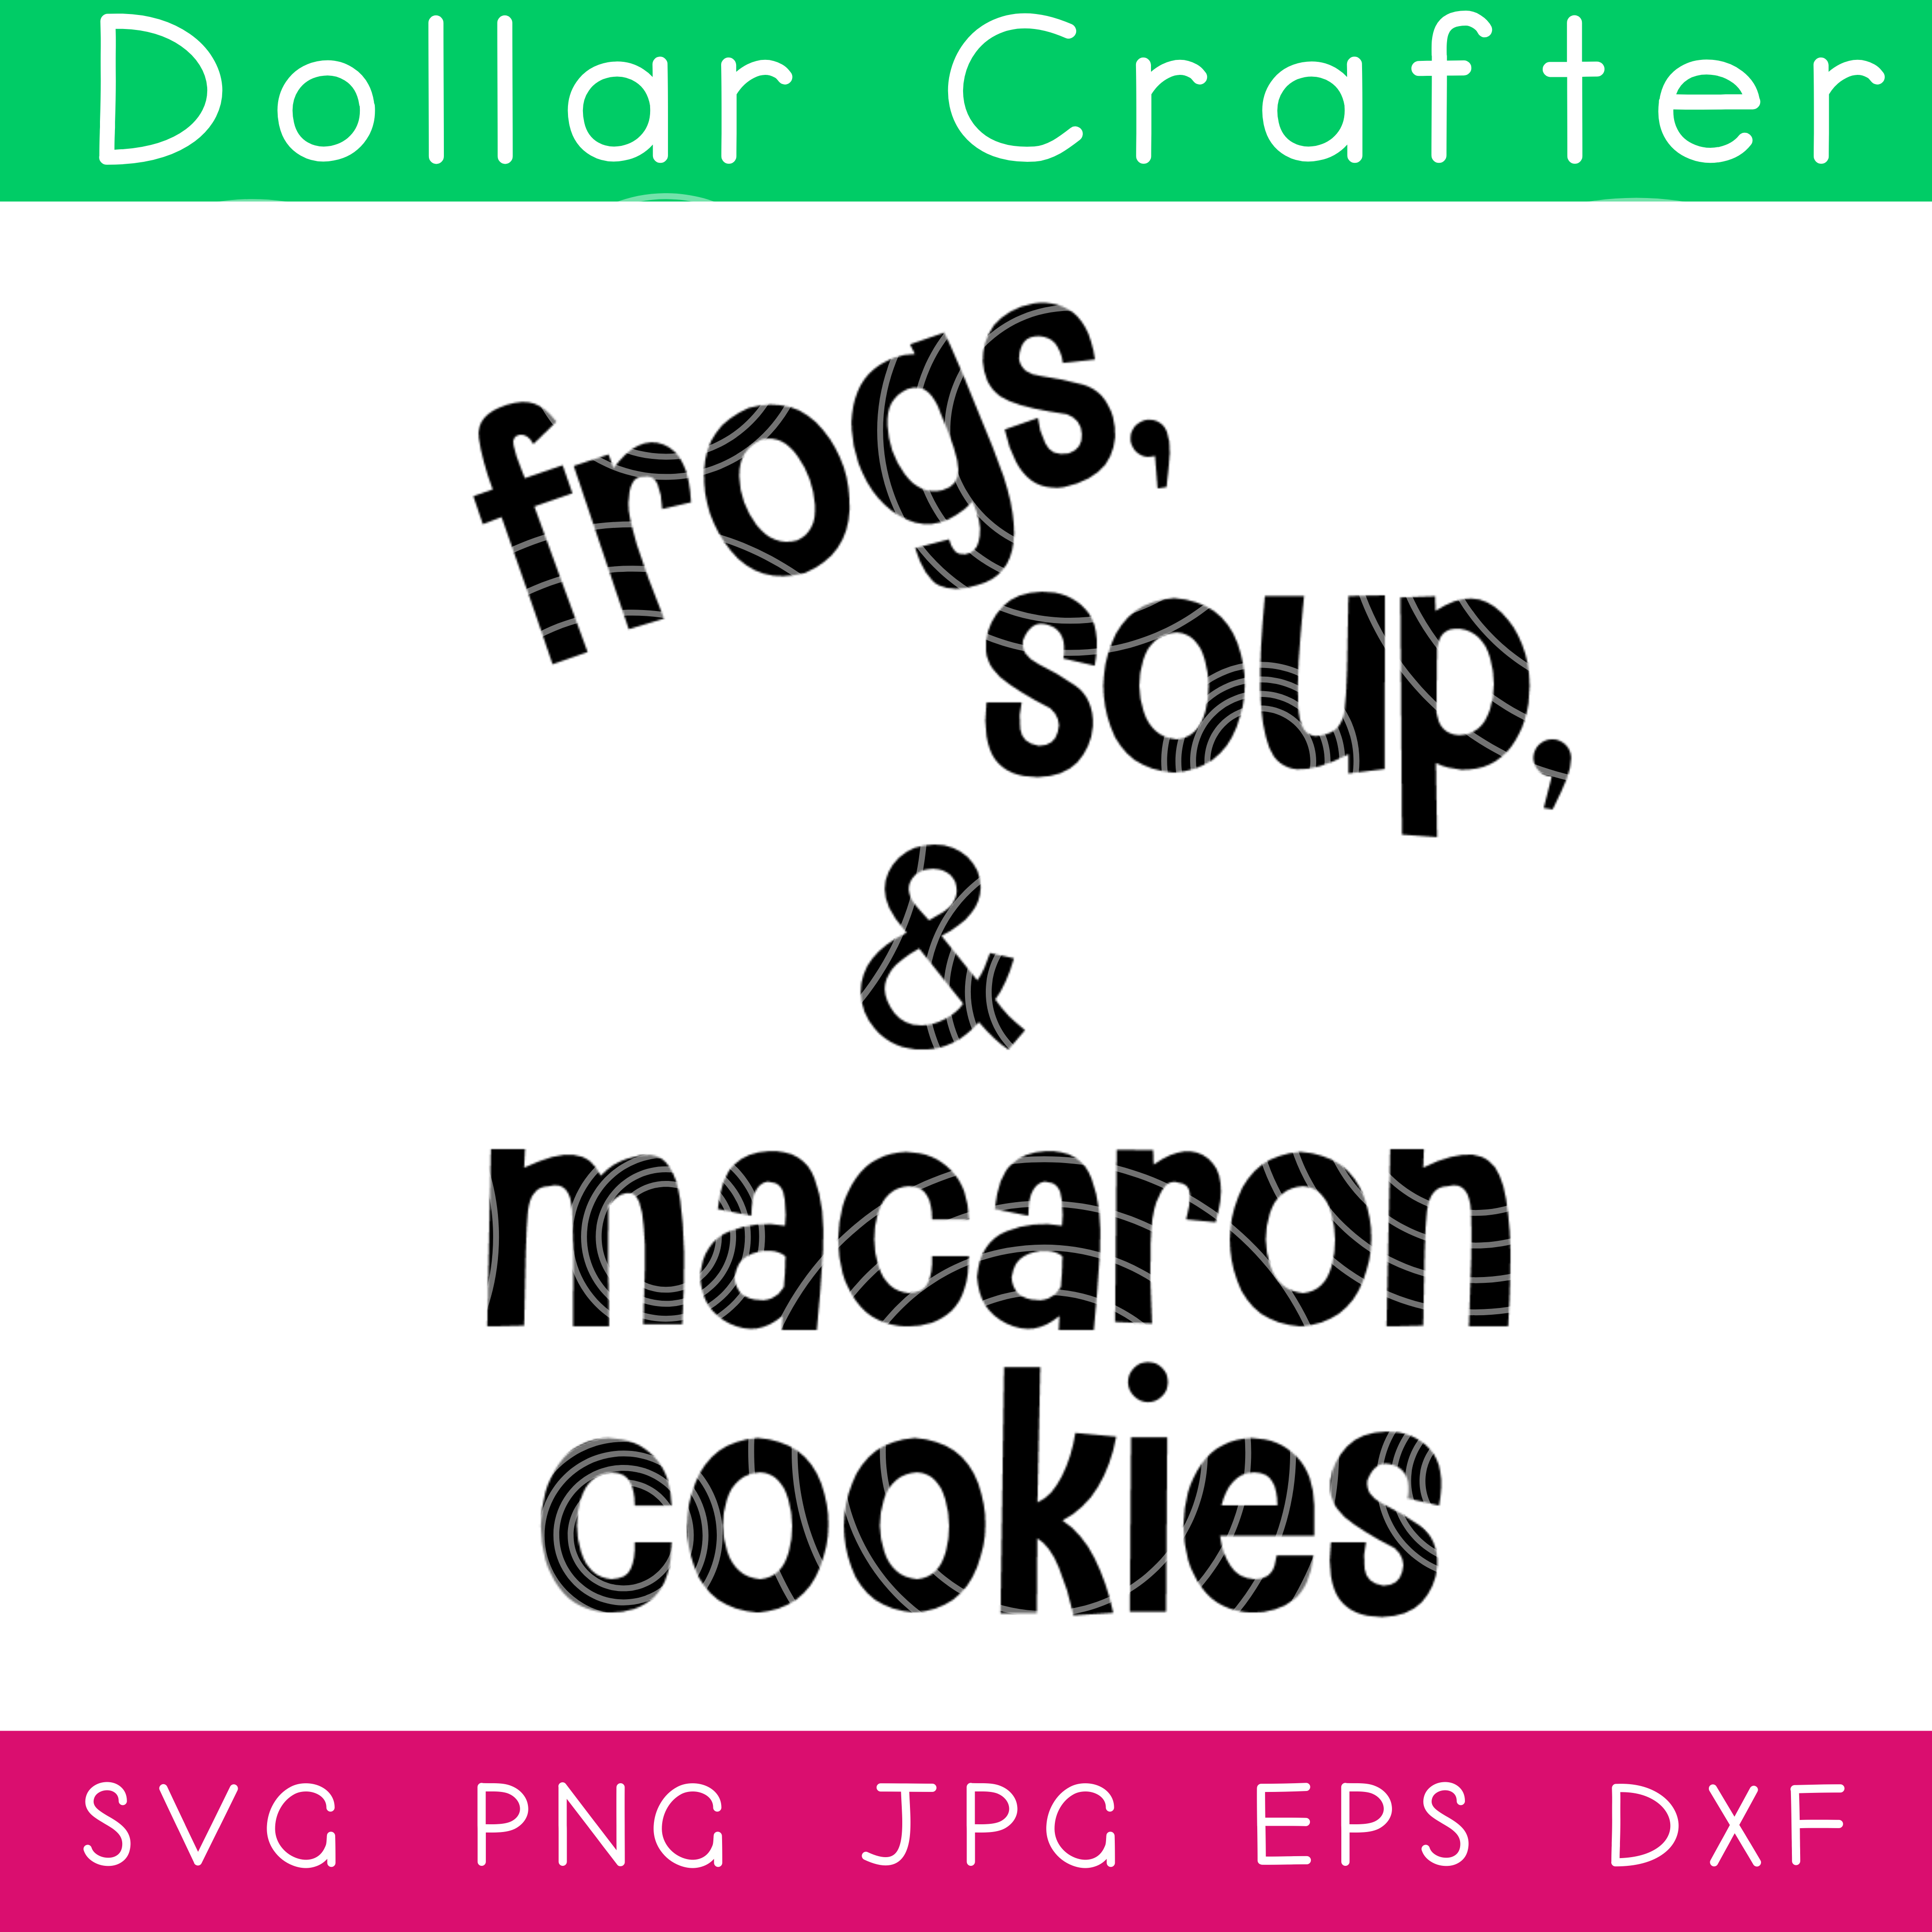 Frogs, Soup, & Macaron Cookies SVG Cut File Set for Cricut or Silhouette